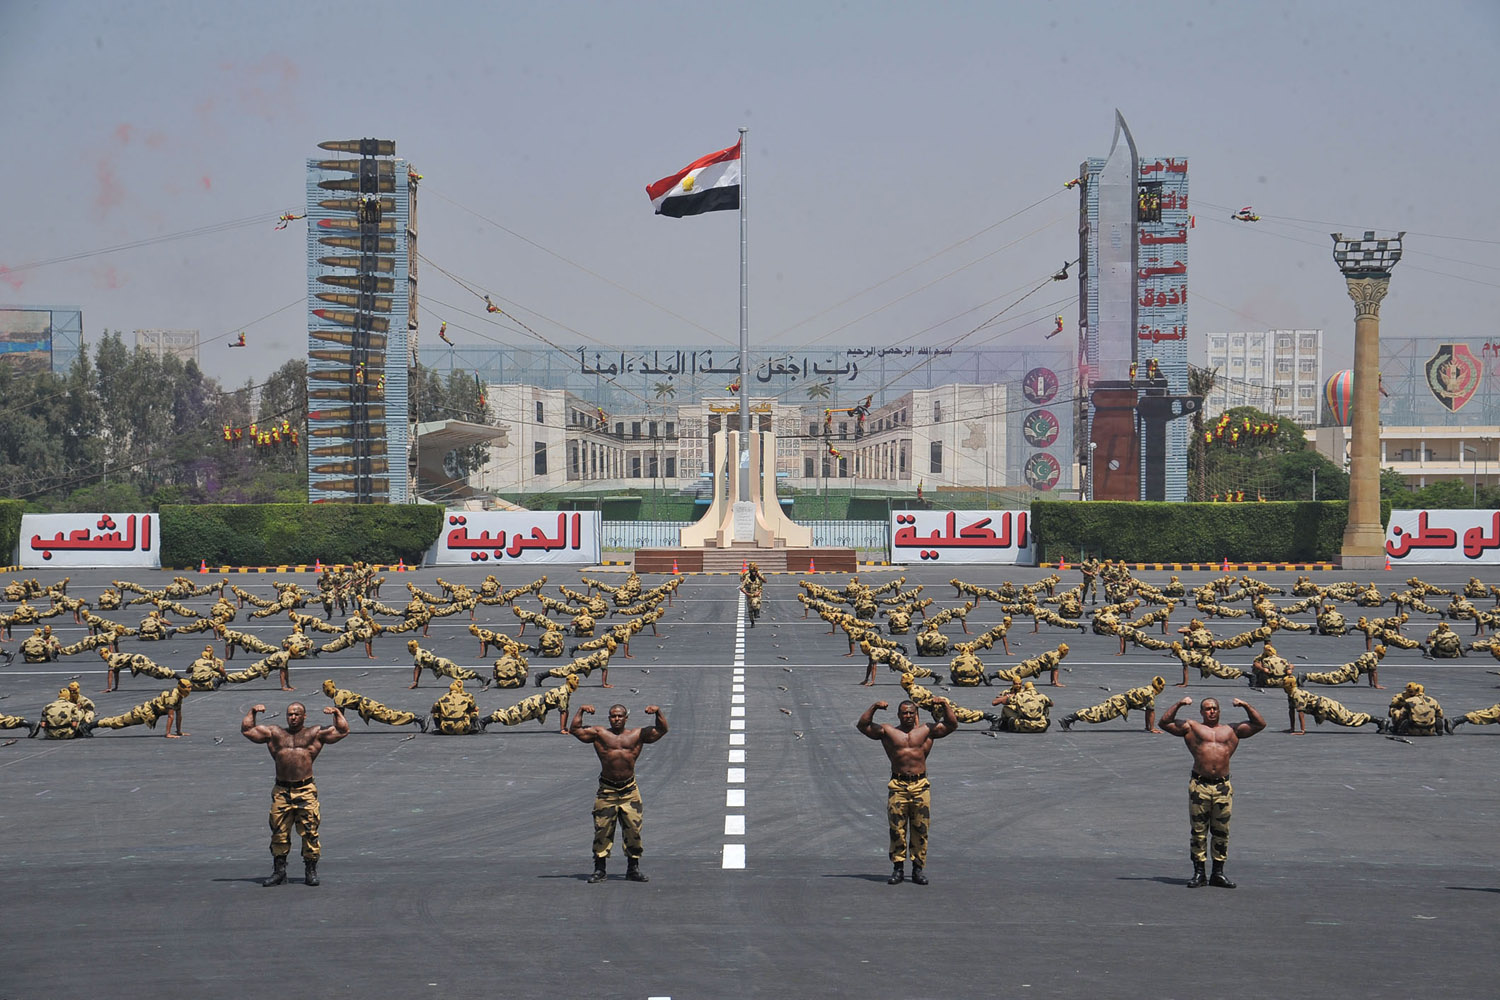 July 17, 2012. Egyptian troops demonstrate their skills at a graduation ceremony attended by President Mohammed Morsi, unseen, in Cairo.